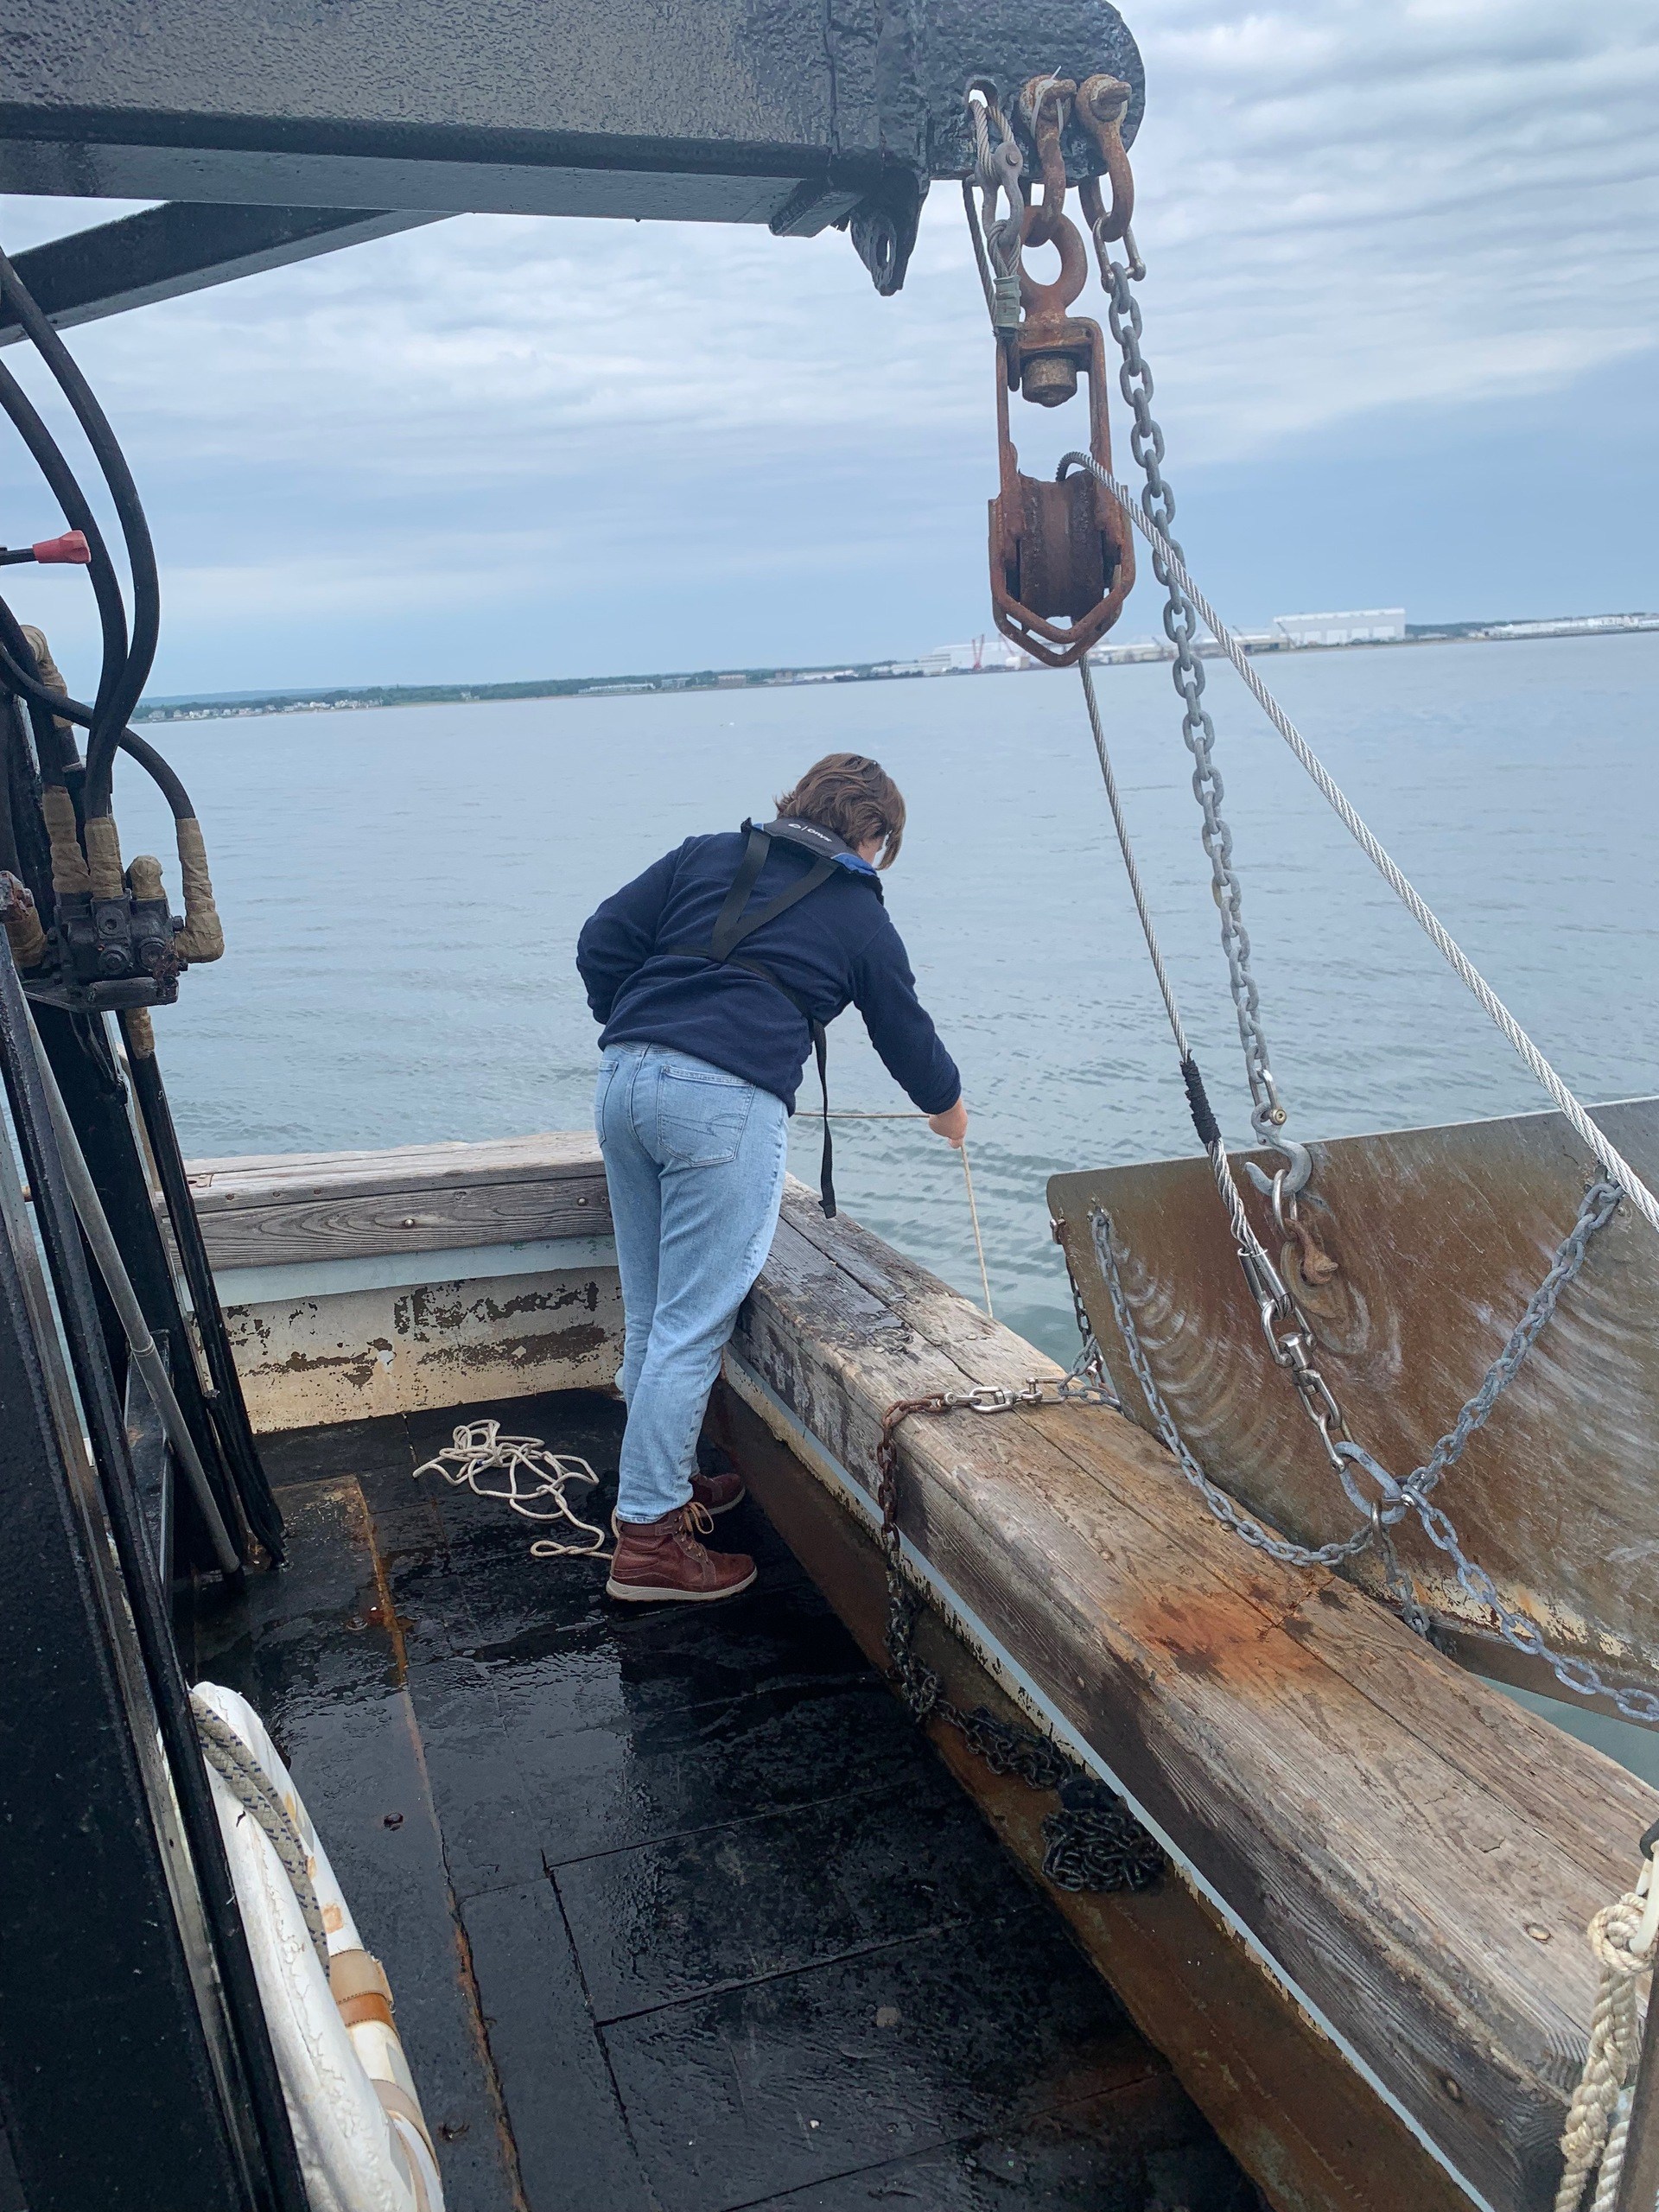 Margaret leaning over boat to collect plankton